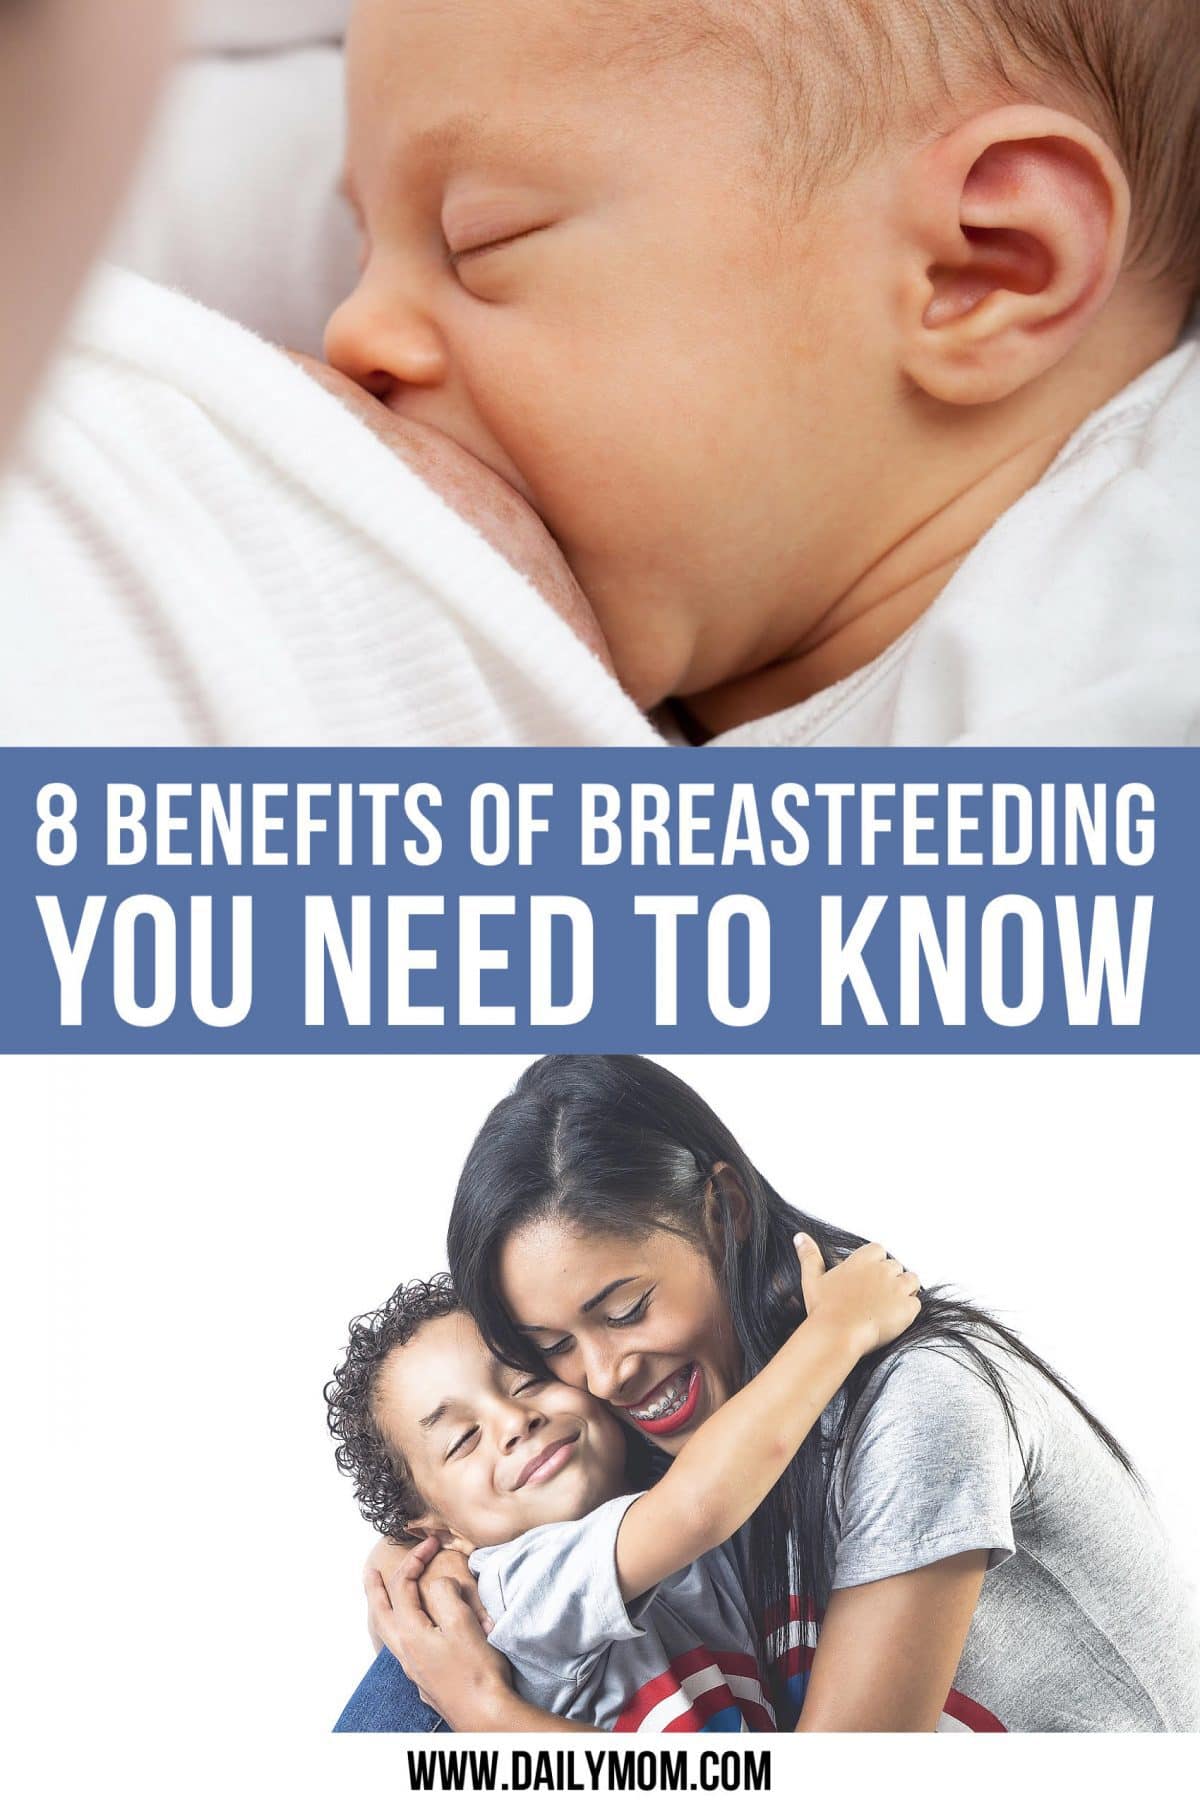 Daily-Mom-Portal-8 Benefits Of Breastfeeding You Need To Know